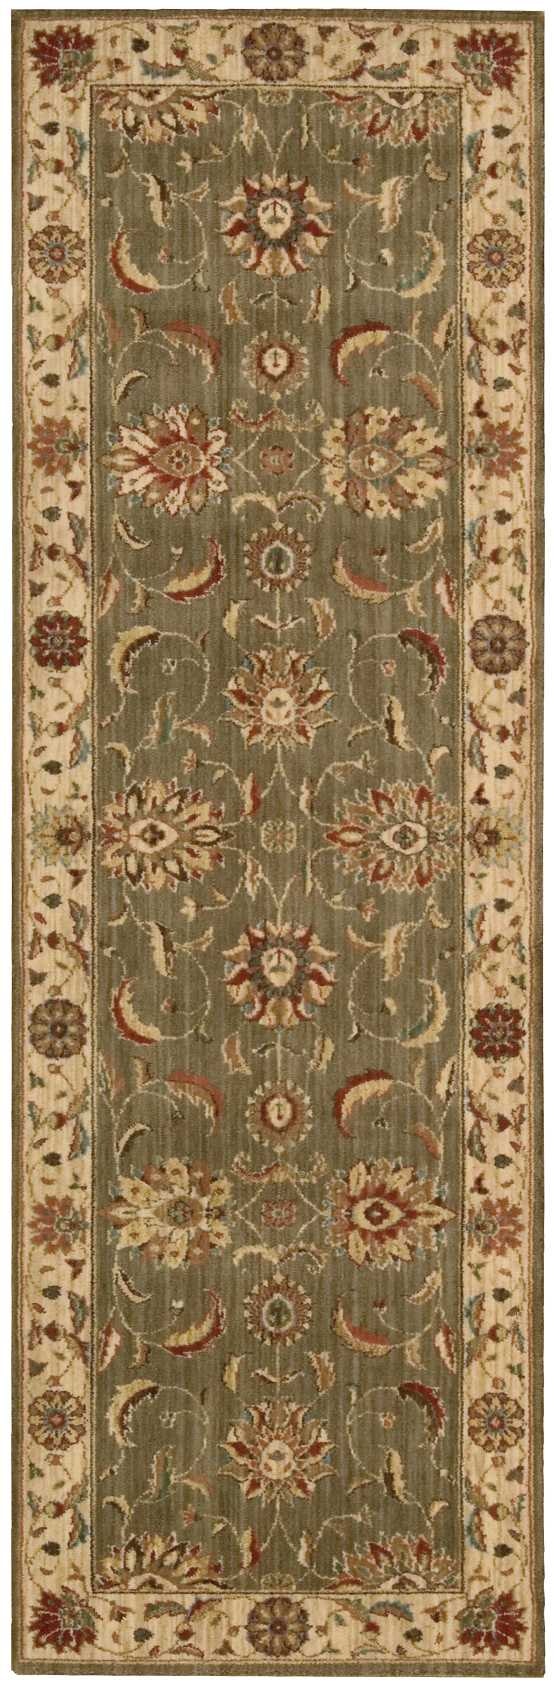 Nourison Living Treasures Green Rectangle Area Rug 8'3 x 11'3 8-Feet 3-Inches by 11-Feet 3-Inches